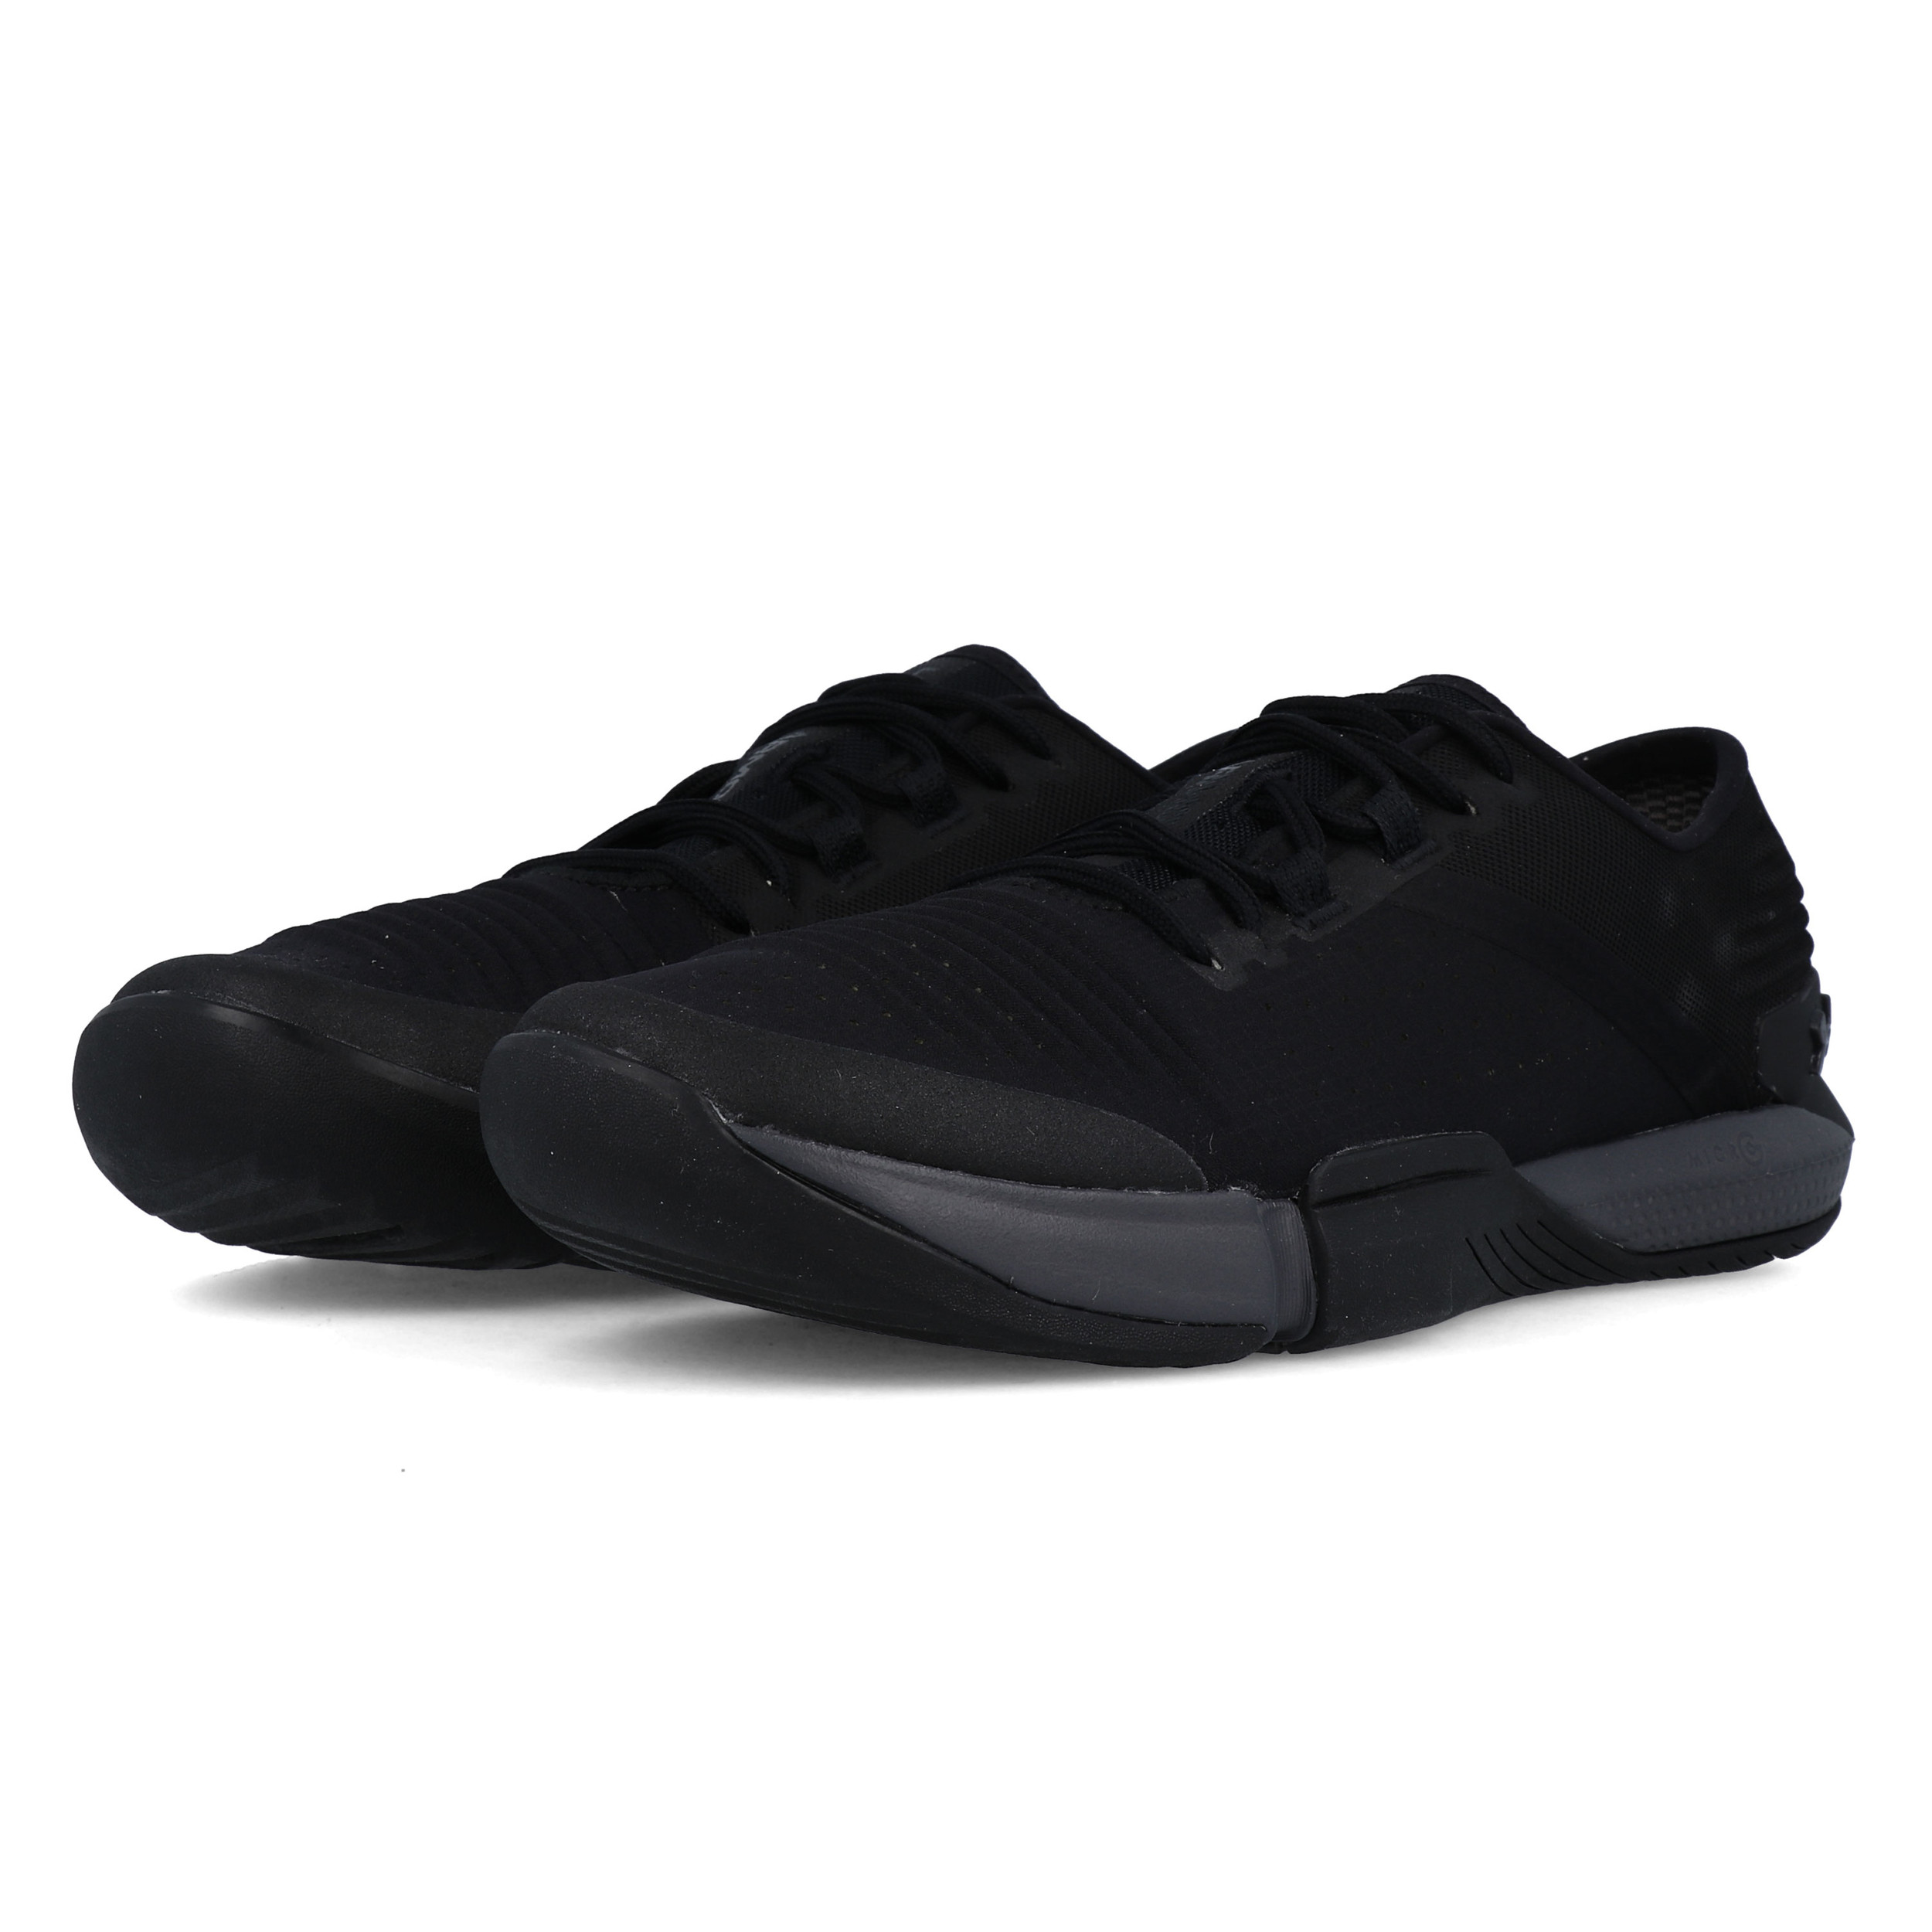 Under Armour TriBase Reign Training schuhe - AW19